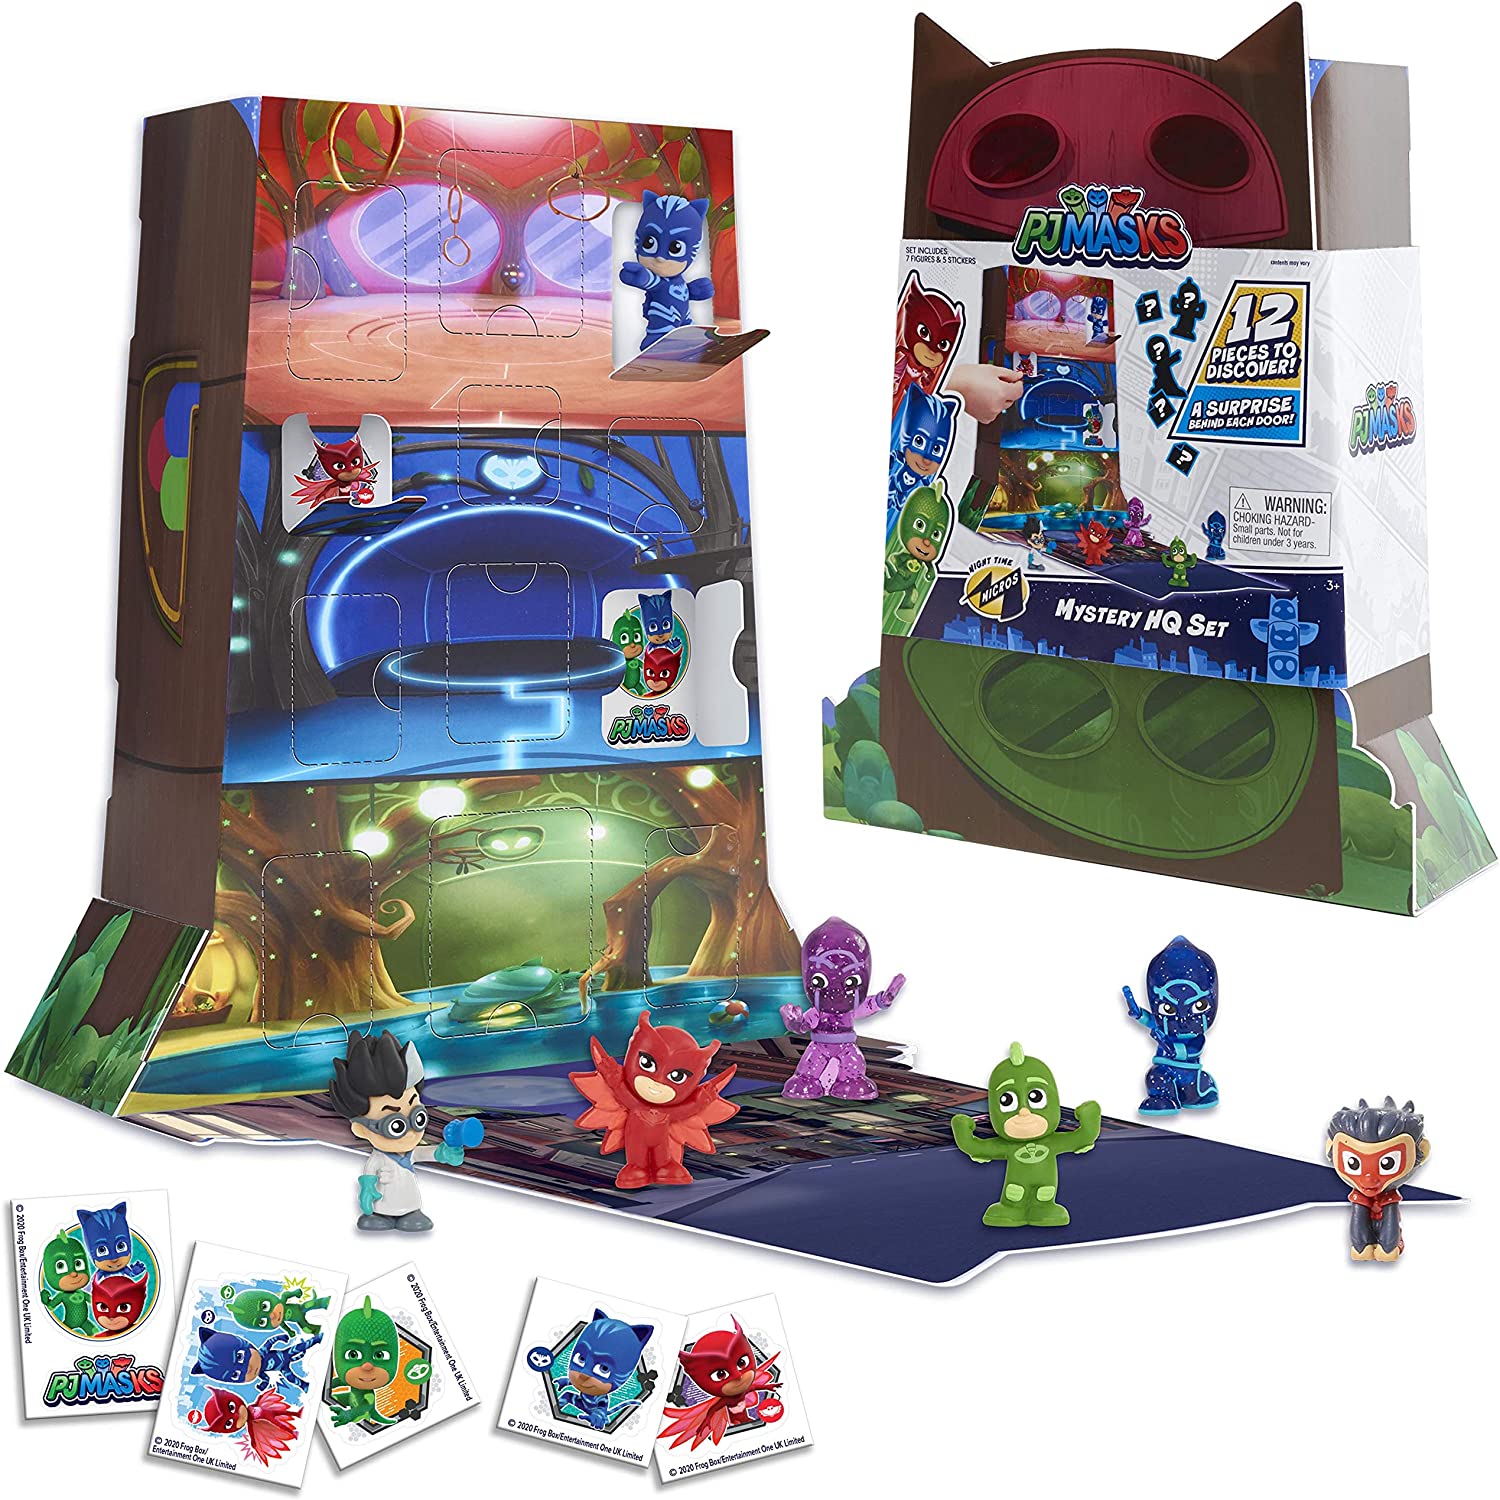 PJ Masks Night Time Micros Mystery HQ Box Set $4 + Free Shipping w/ Prime or on $25+